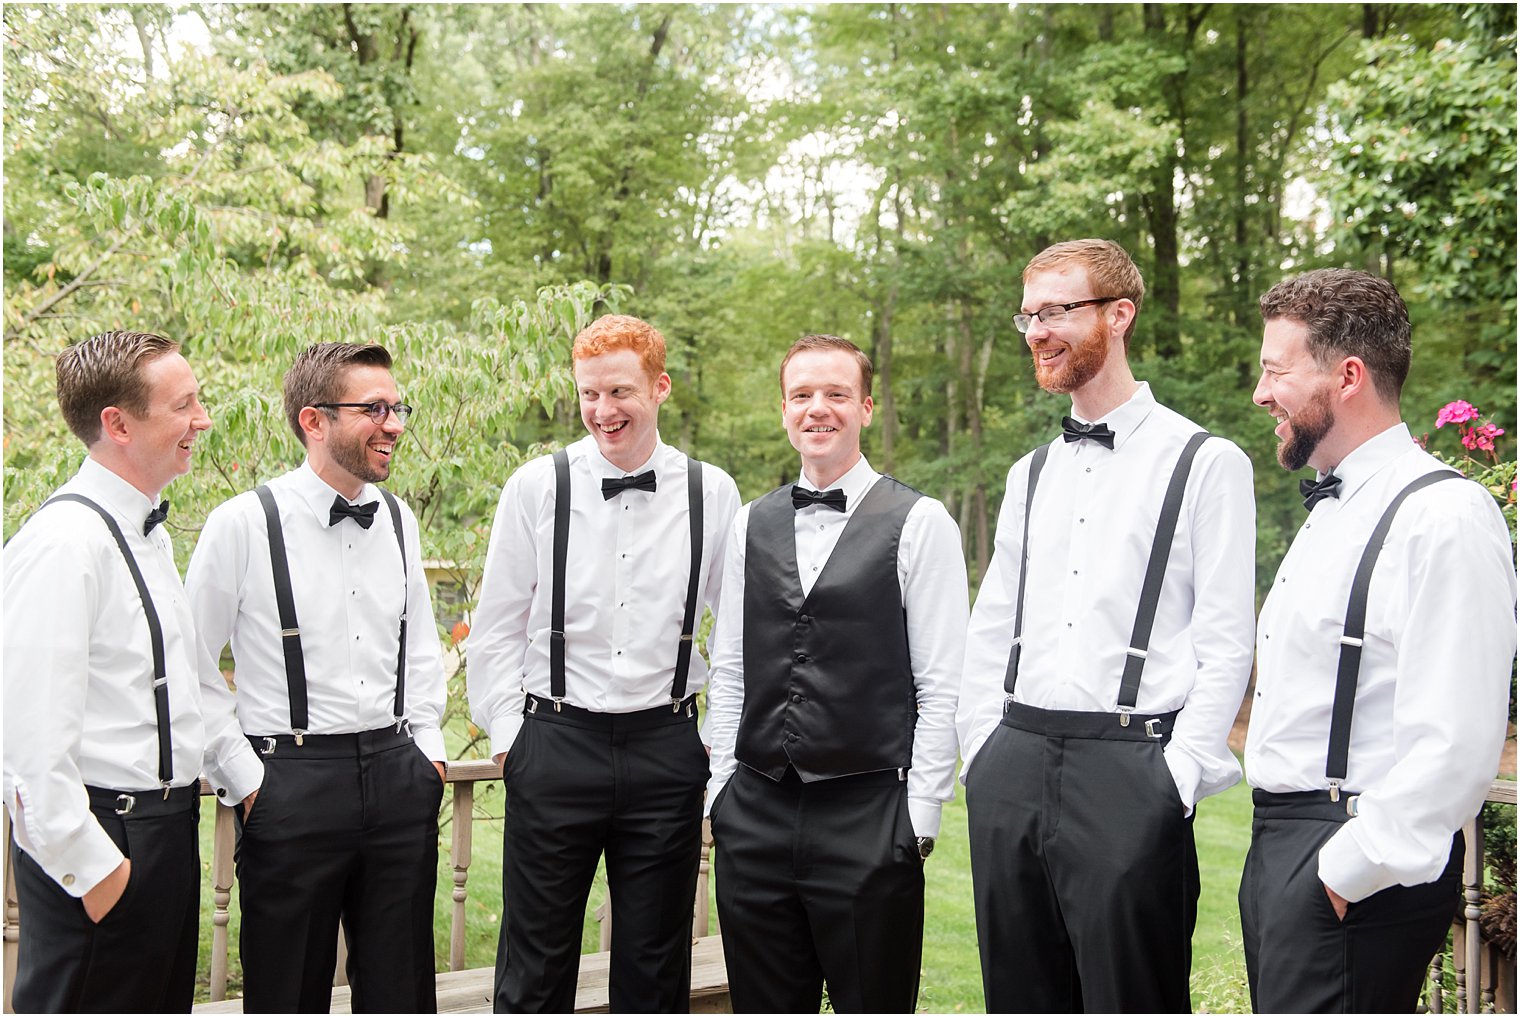 Groomsman photos during getting ready